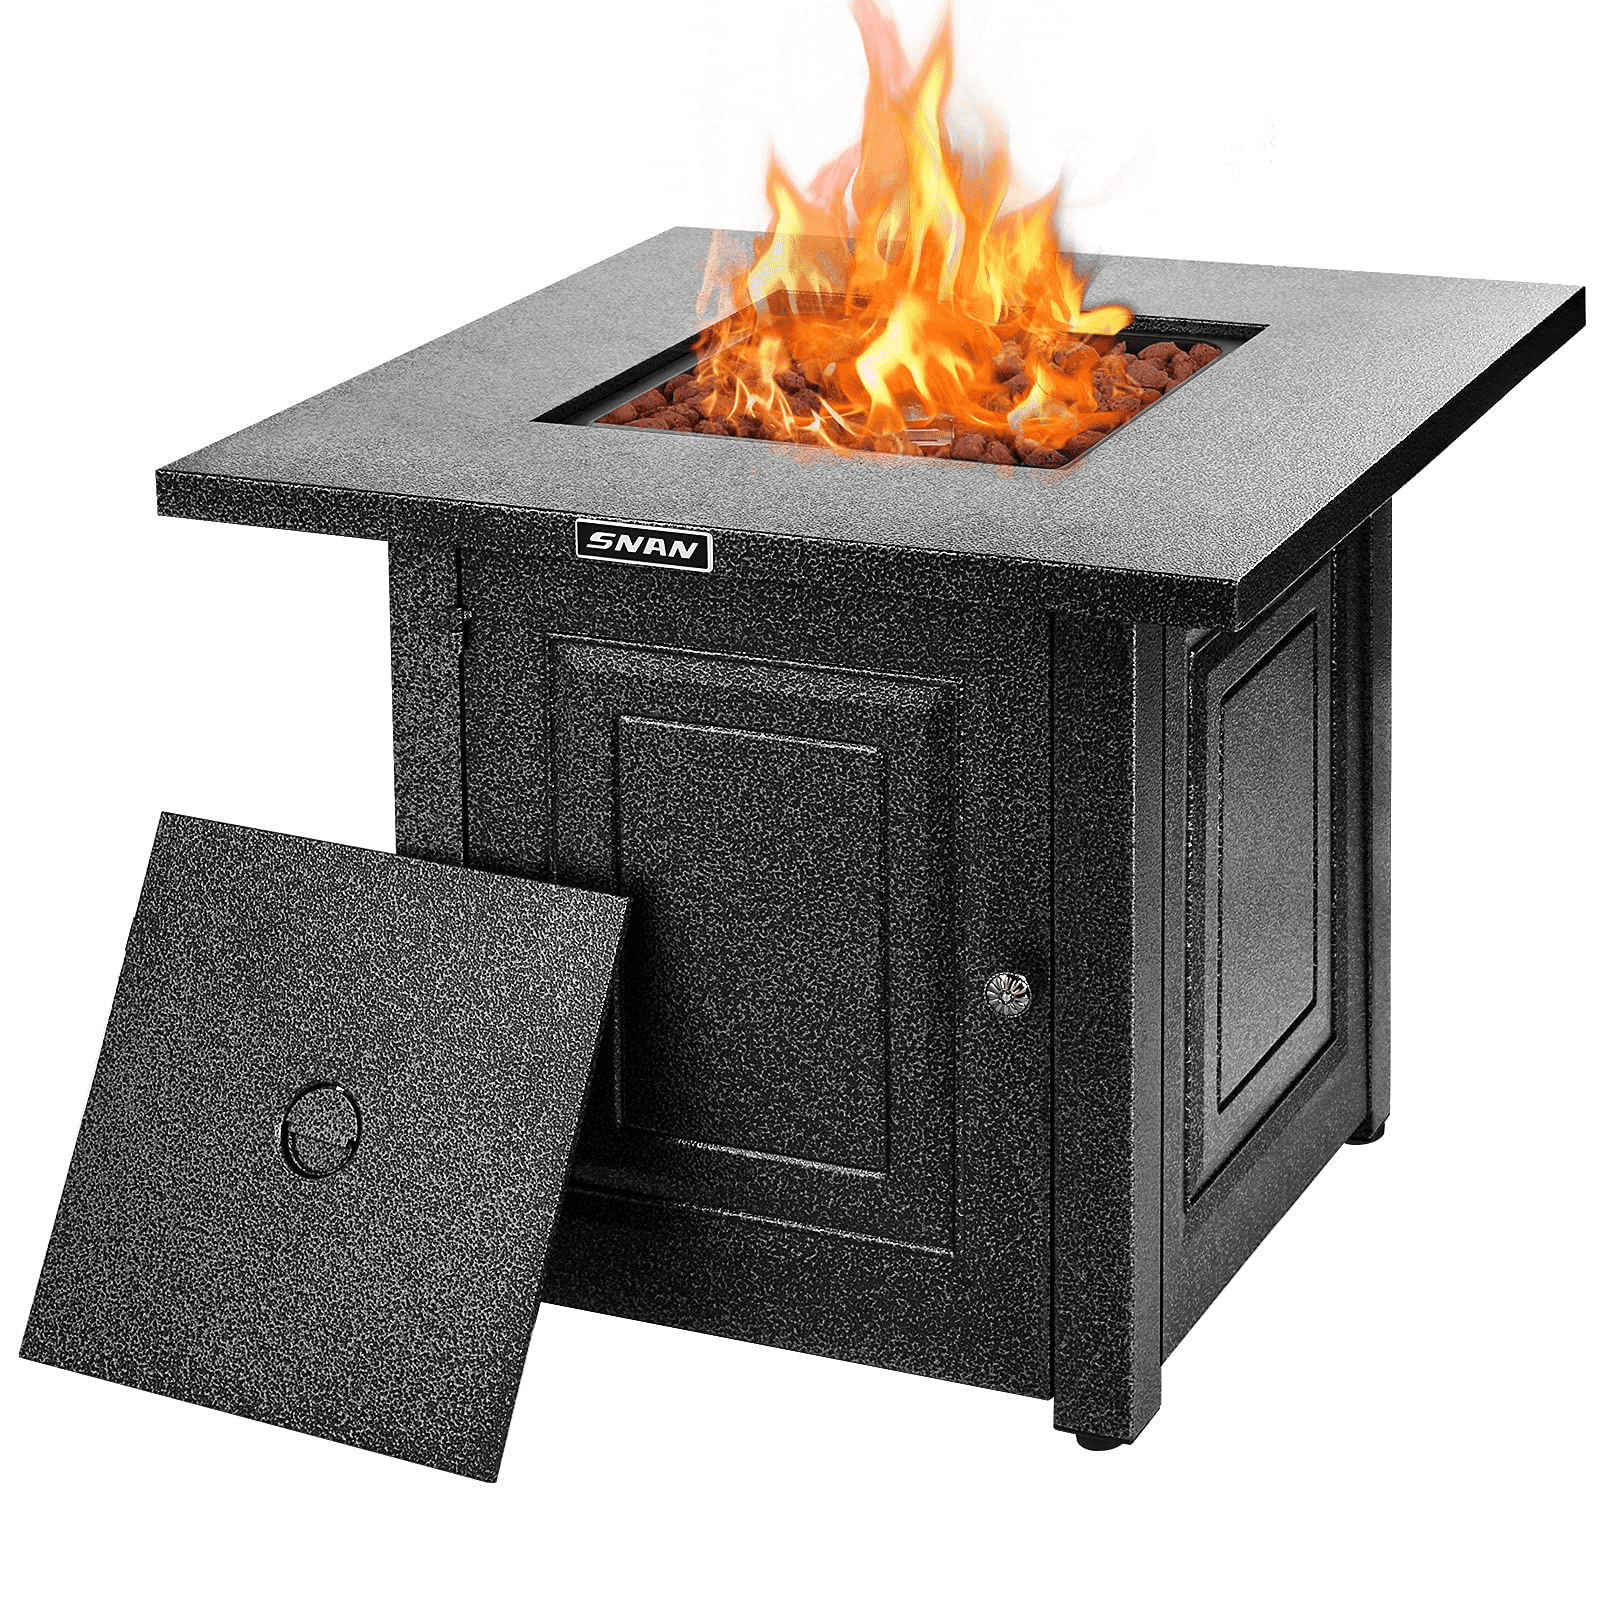 Outdoor Propane Fire Pit Patio Heater Gas Table 28" Square Fireplace Lava rock 